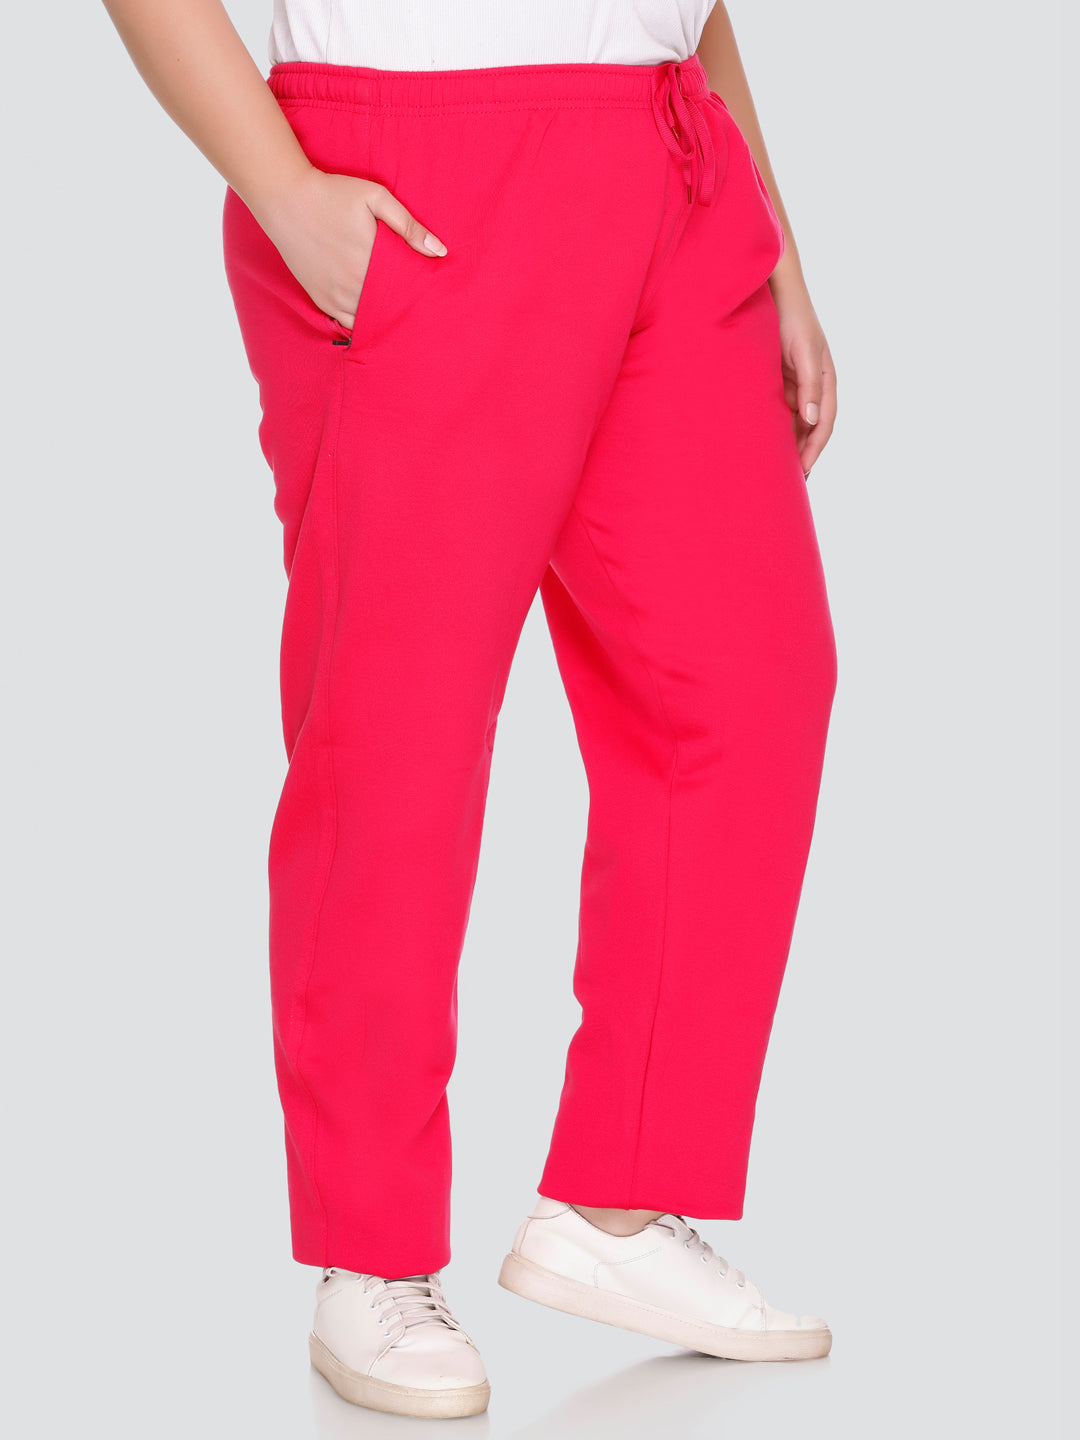 Buy Hot Pink Trousers Online In India -  India